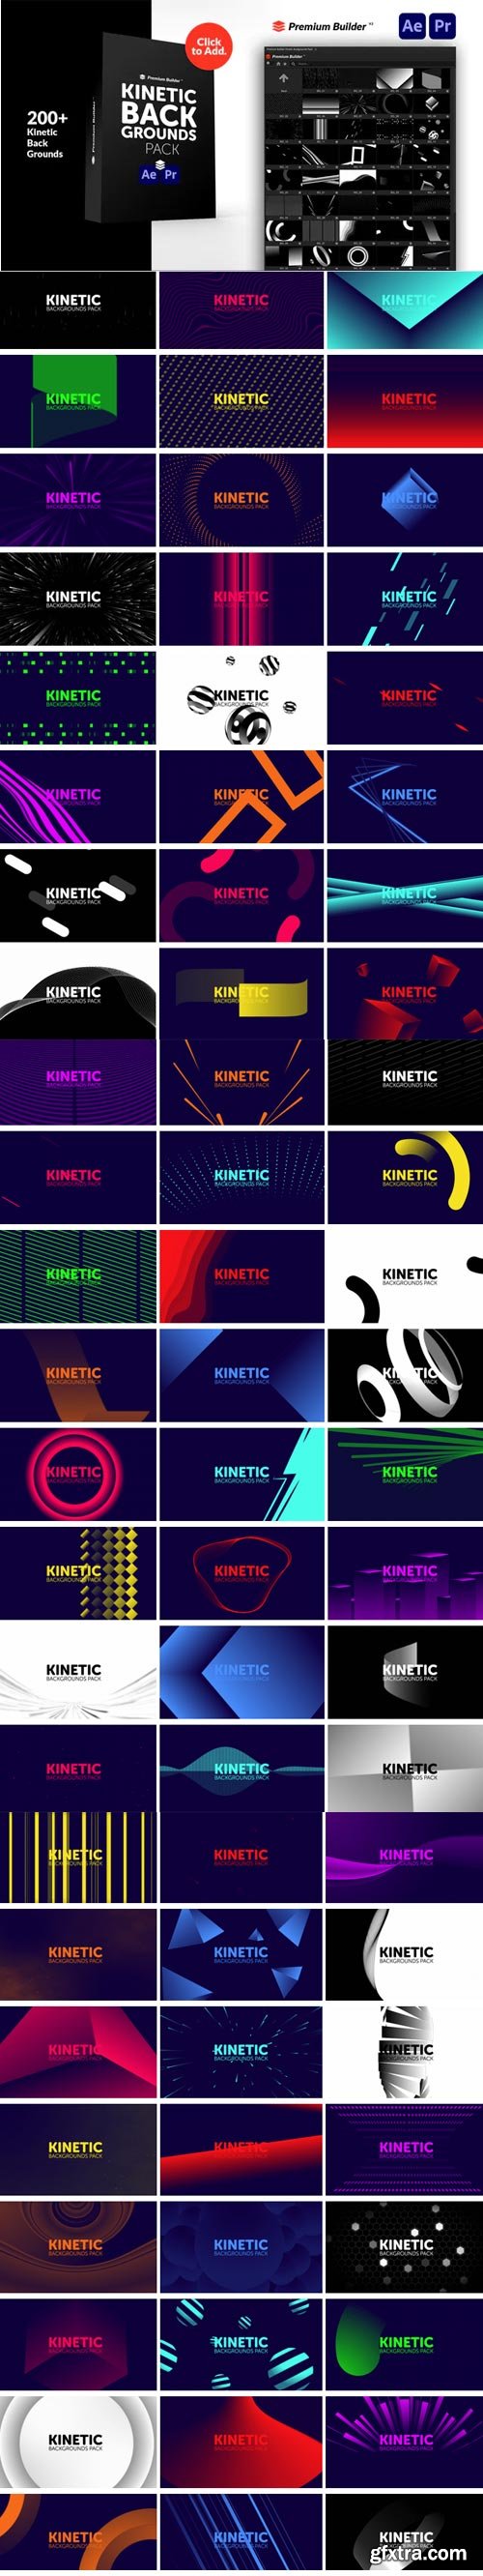 Videohive - Kinetic Backgrounds Pack - 32854609